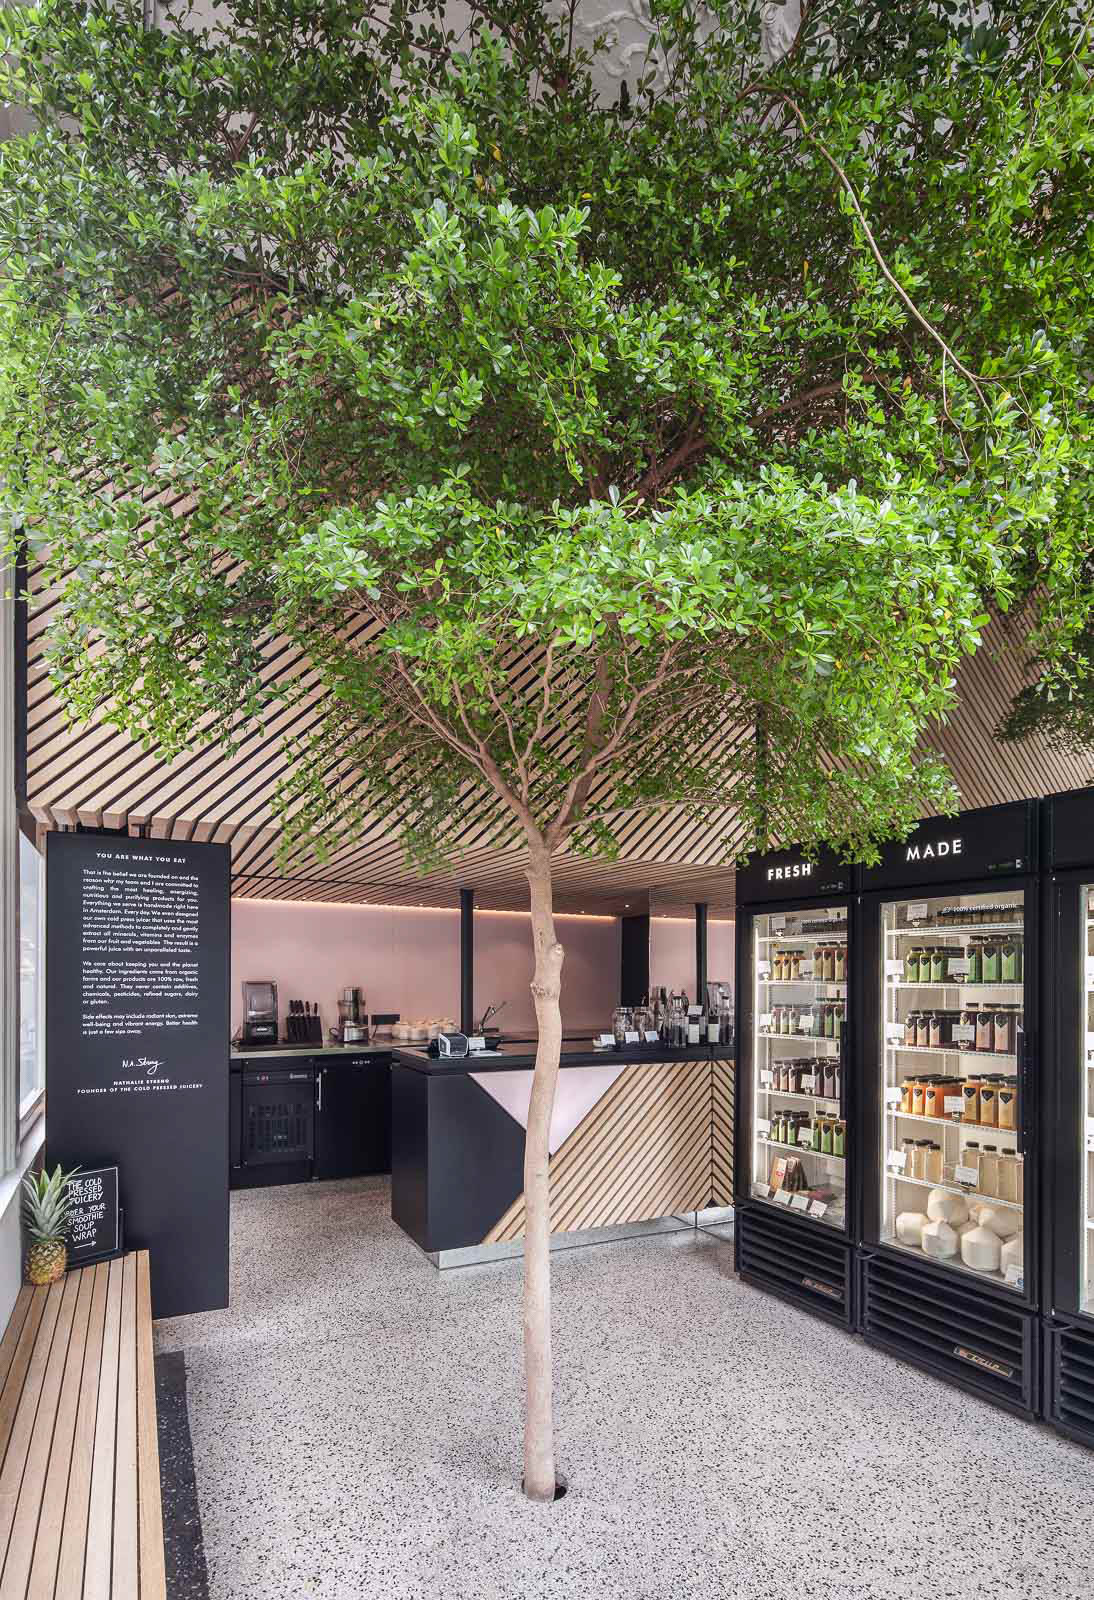 The Cold Pressed Juicery Nine Streets